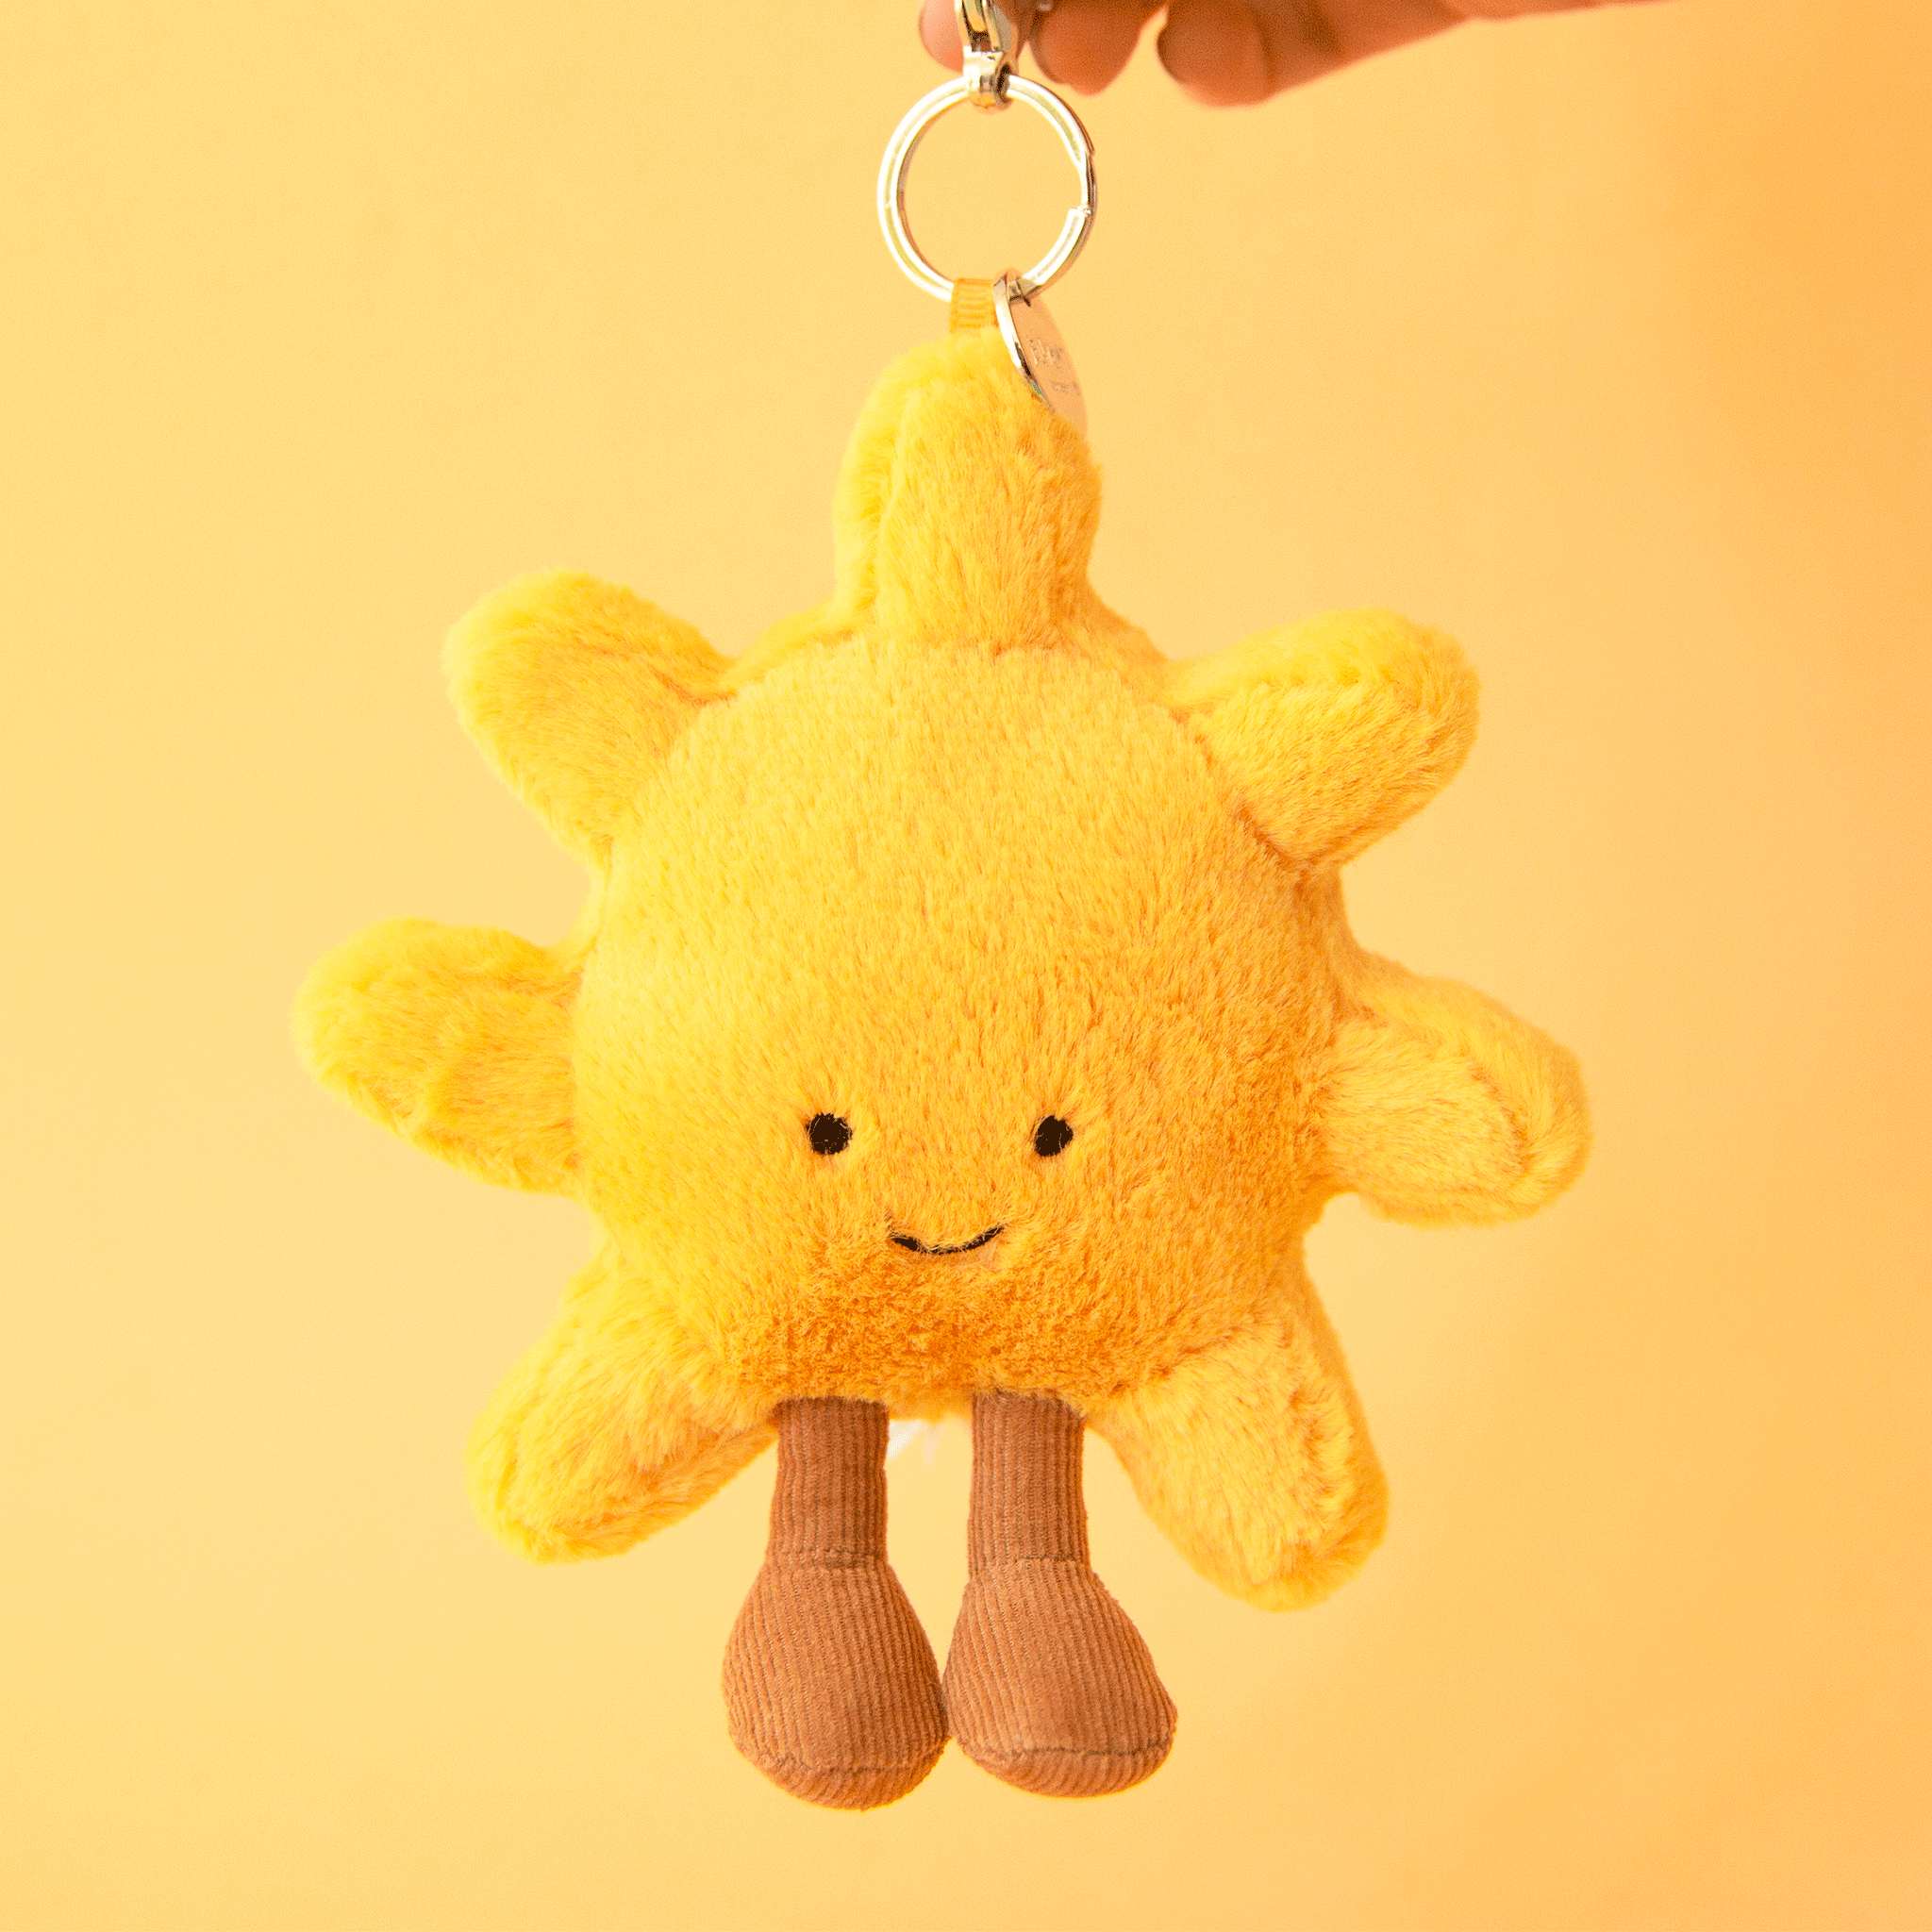 On a yellow background is a yellow sun shaped stuffed toy keychain / bag charm.